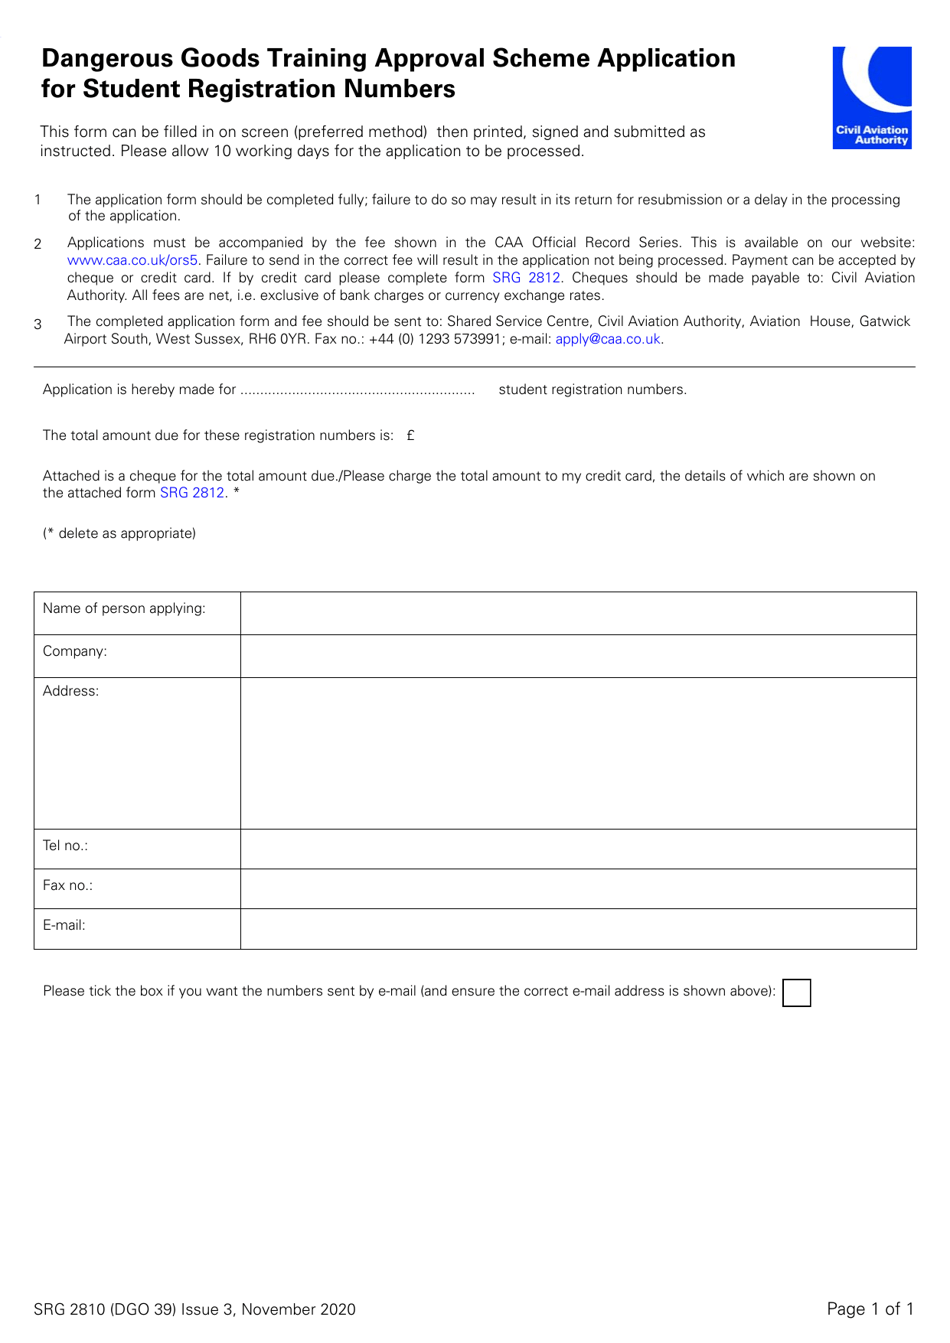 Form SRG2810 (DGO39) Dangerous Goods Training Approval Scheme Application for Student Registration Numbers - United Kingdom, Page 1